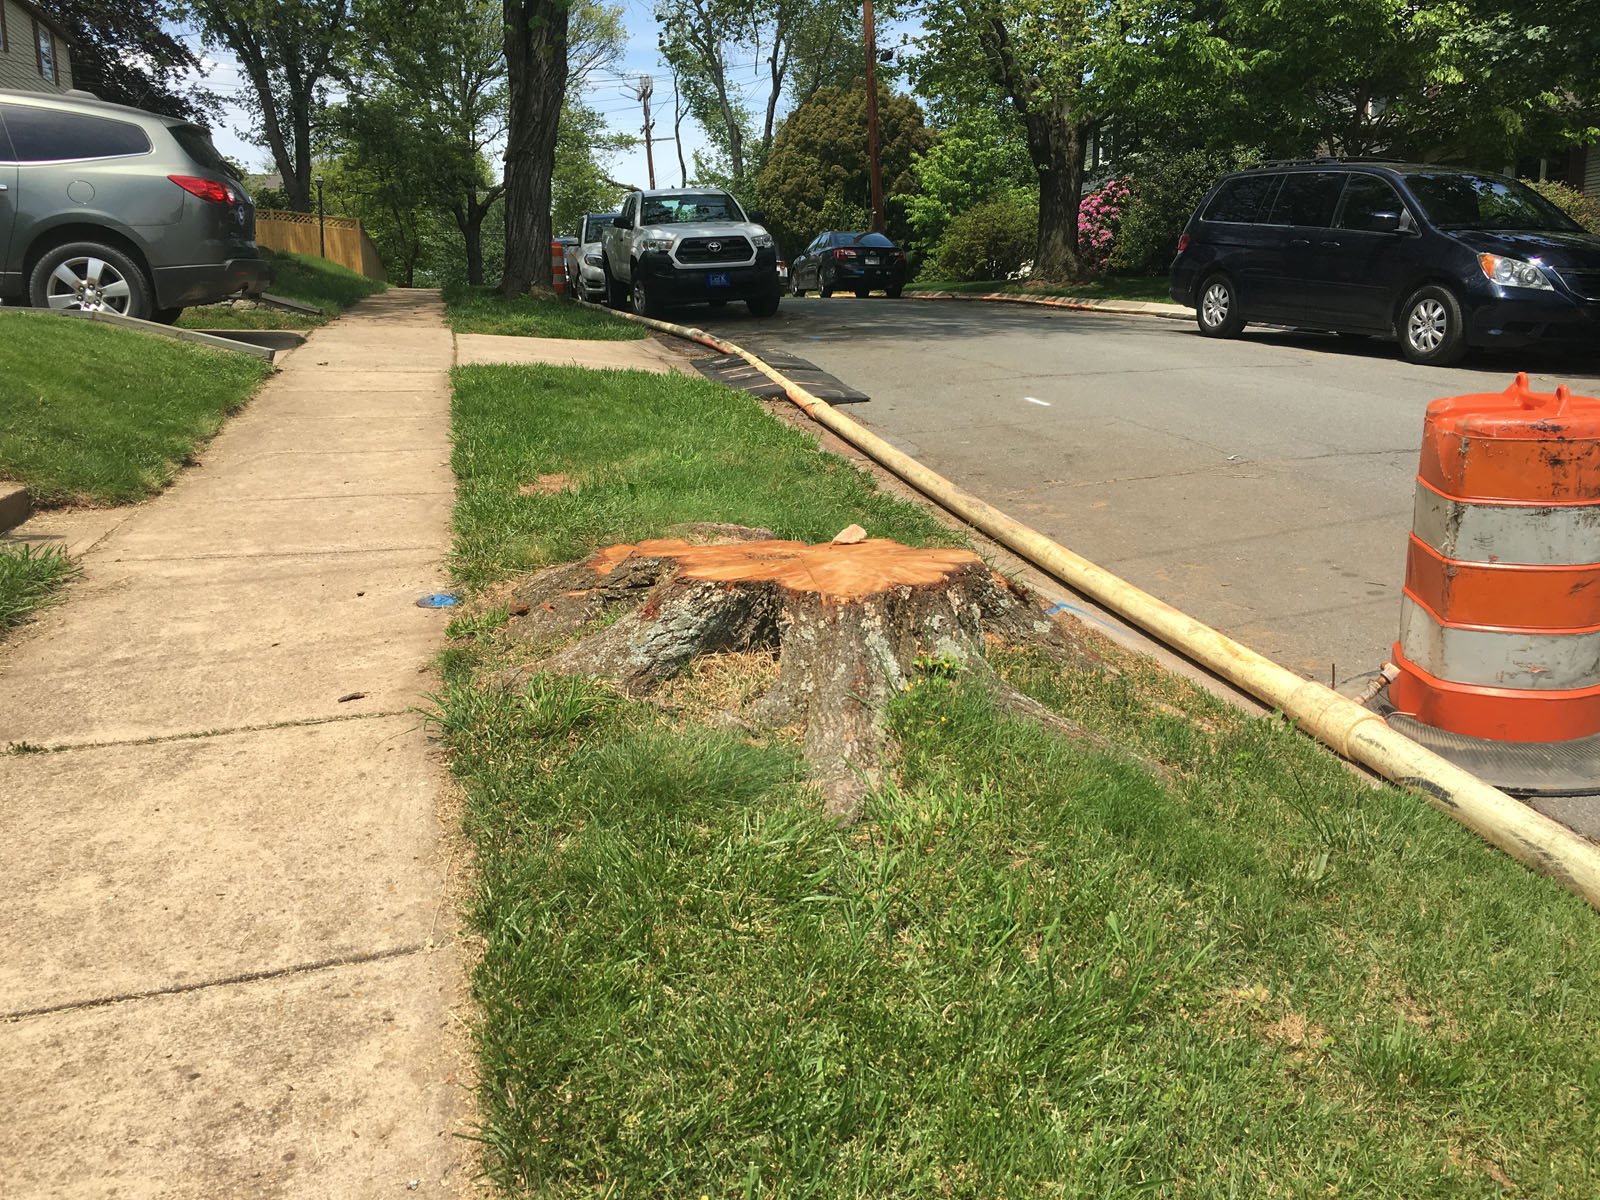 “A number of trees in that neighborhood were taken down before proper notification was given, and that’s absolutely something we apologize for,” said Jerry Irvine, a spokesman for WSSC. (WTOP/Mike Murillo)